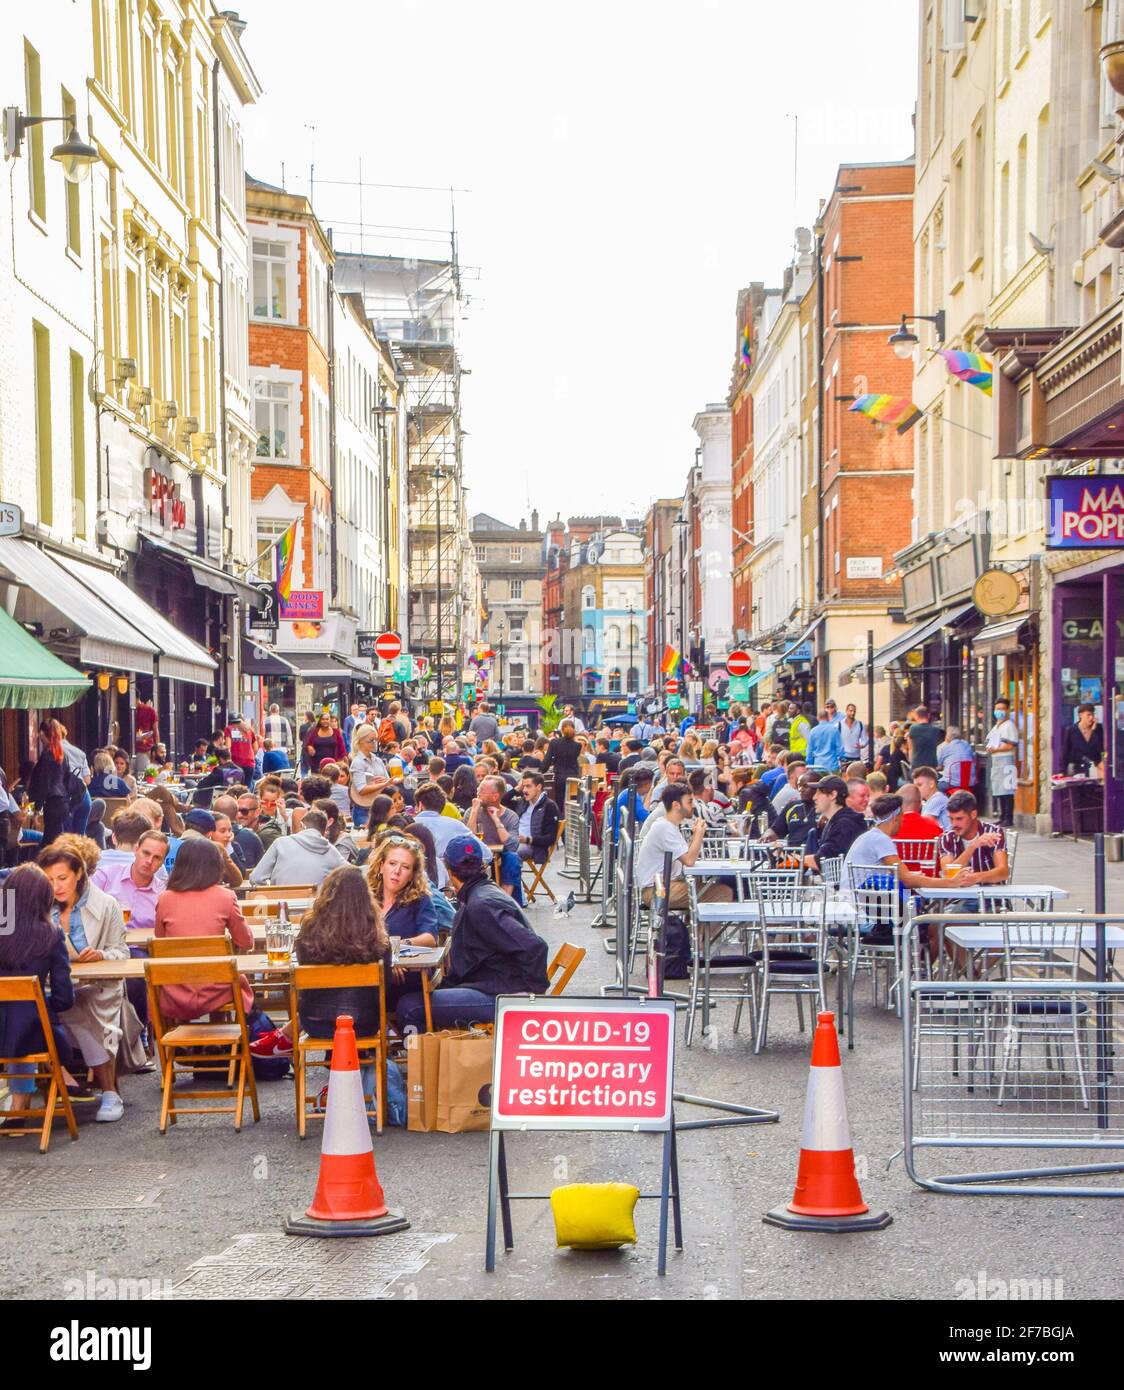 Crowd of people in Old Compton Street, Soho. Temporary al fresco street seating was implemented to allow bars and restaurants to operate and facilitate social distancing during the coronavirus pandemic. London, United Kingdom, 21st August 2020. Stock Photo